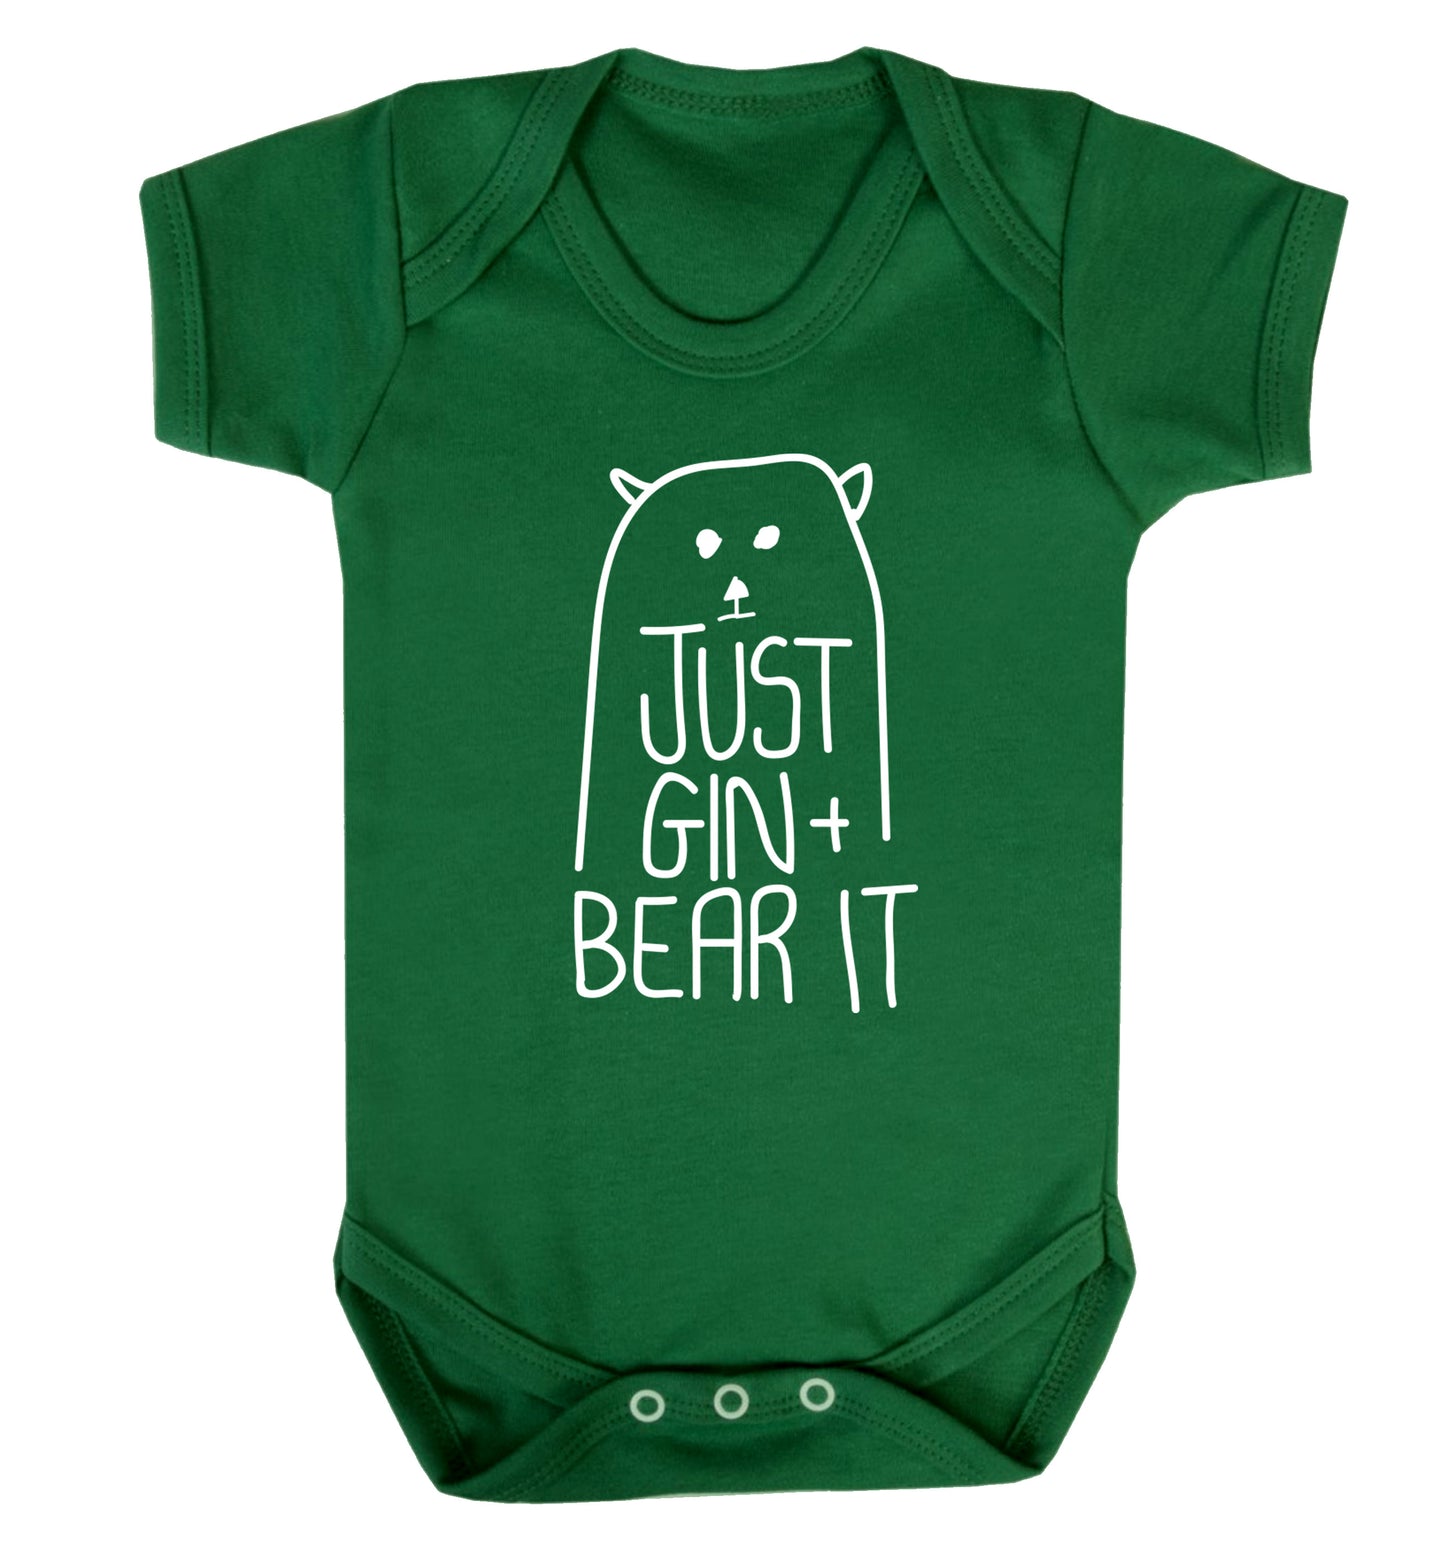 Just gin and bear it Baby Vest green 18-24 months